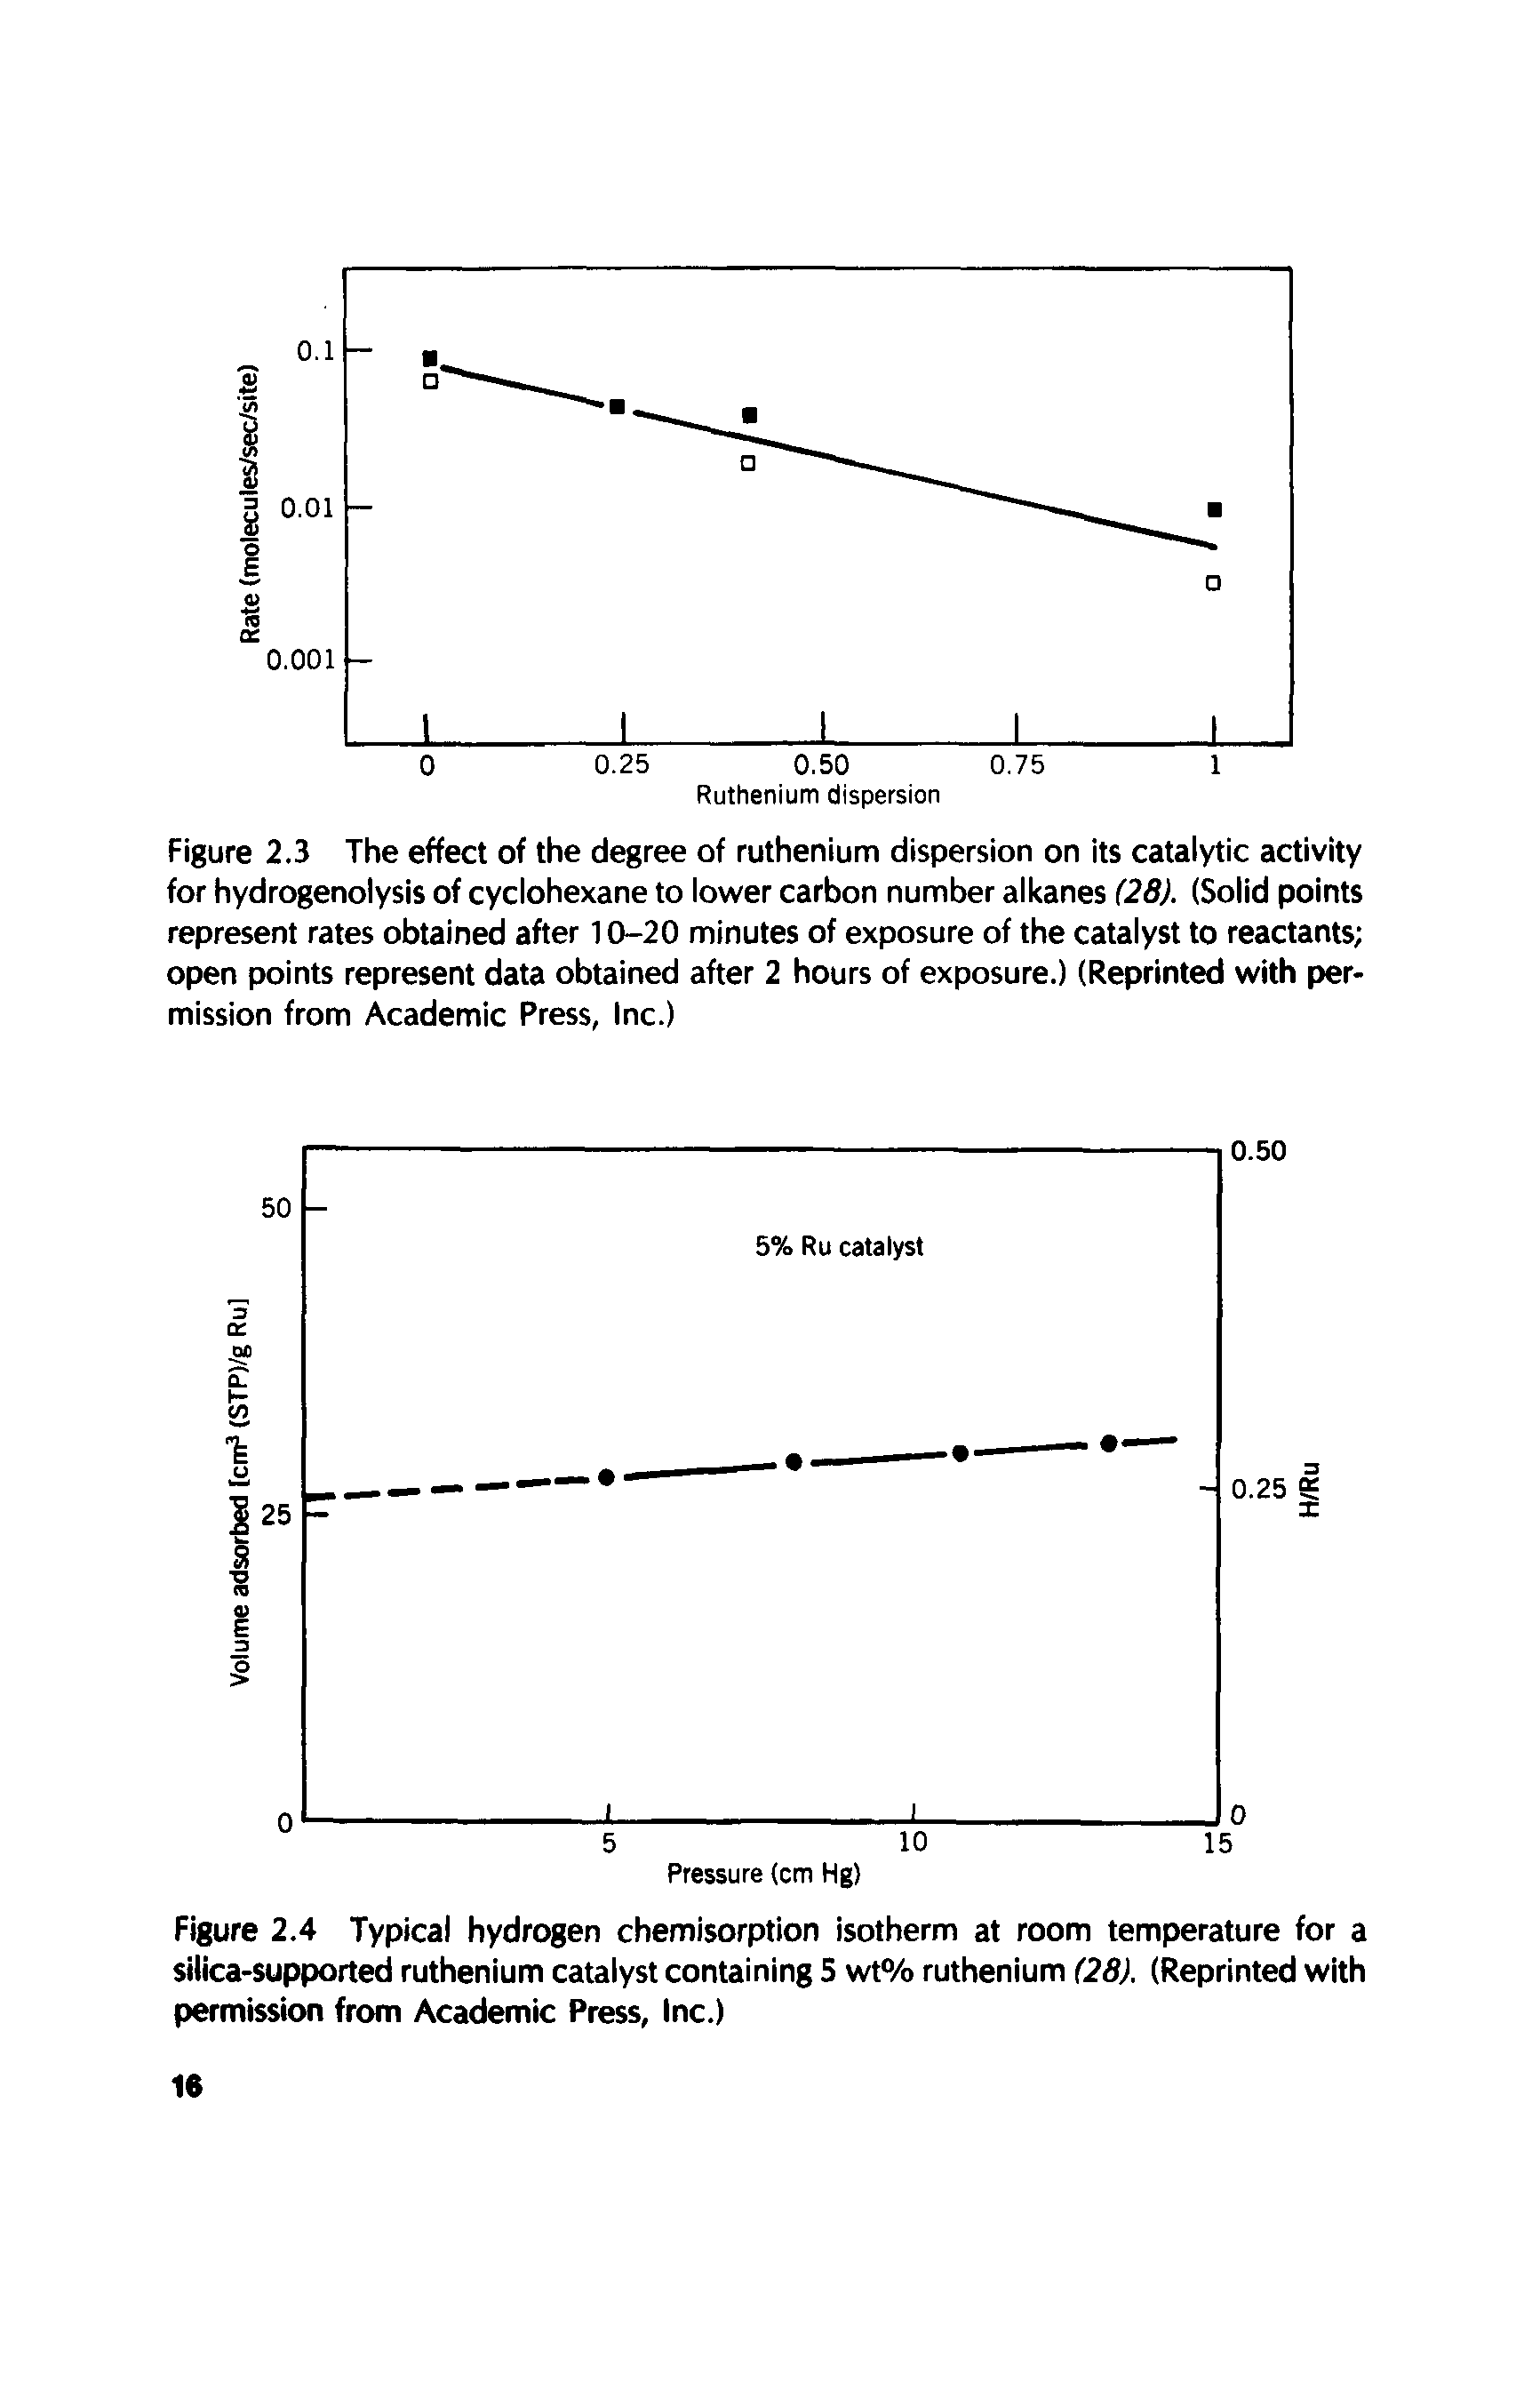 Figure 2.4 Typical hydrogen chemisorption isotherm at room temperature for a silica-supported ruthenium catalyst containing 5 wt% ruthenium (28). (Reprinted with permission from Academic Press, Inc.)...